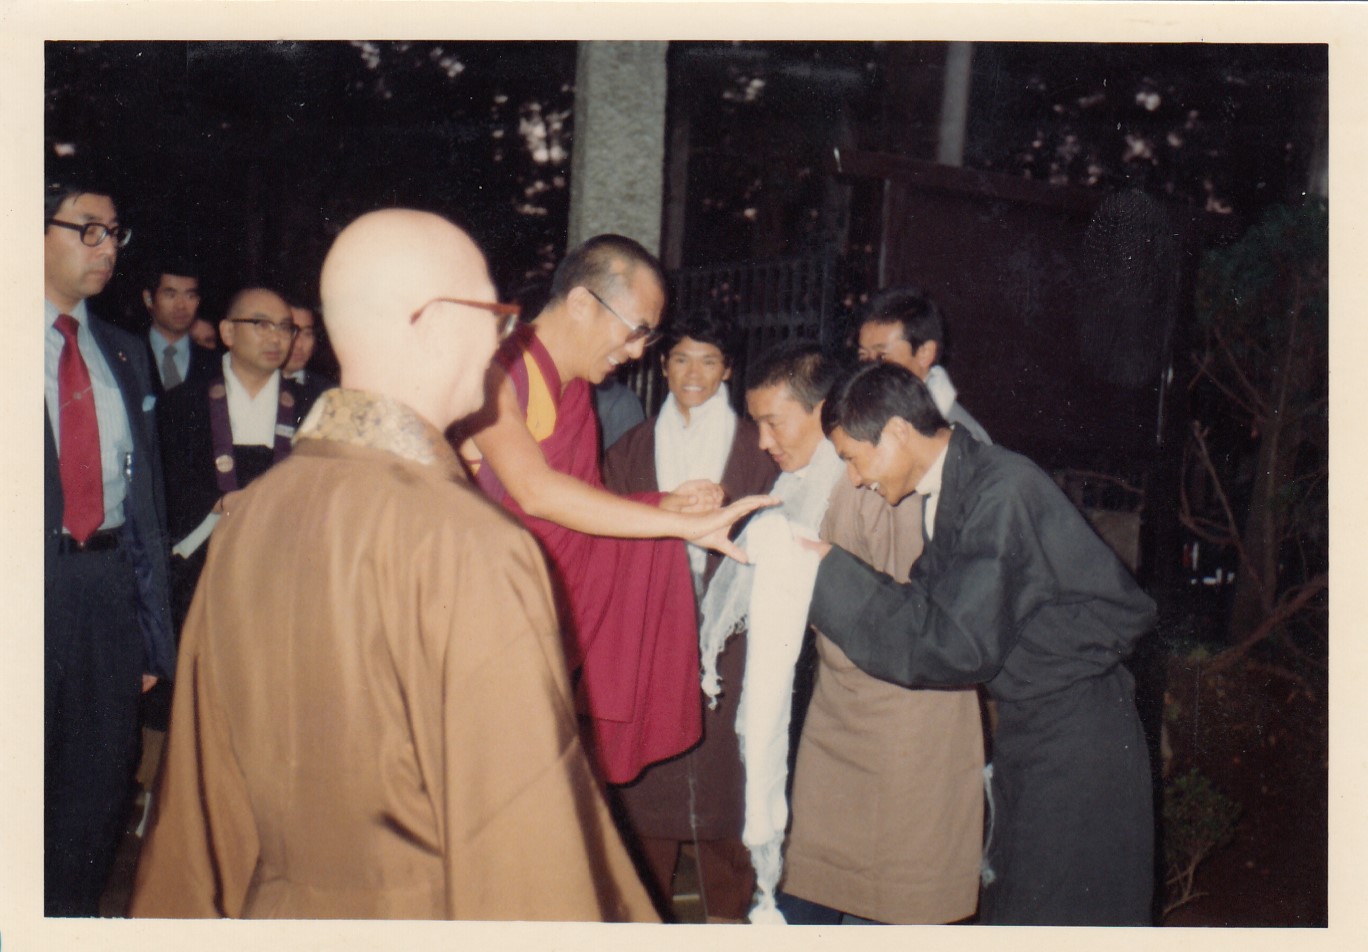 Tibetan students including Mr. Tsering Dorjee welcoming His Holiness the 14th Dalai Lama upon his arrival at Chiba Ken Agriculture College in Japan. 